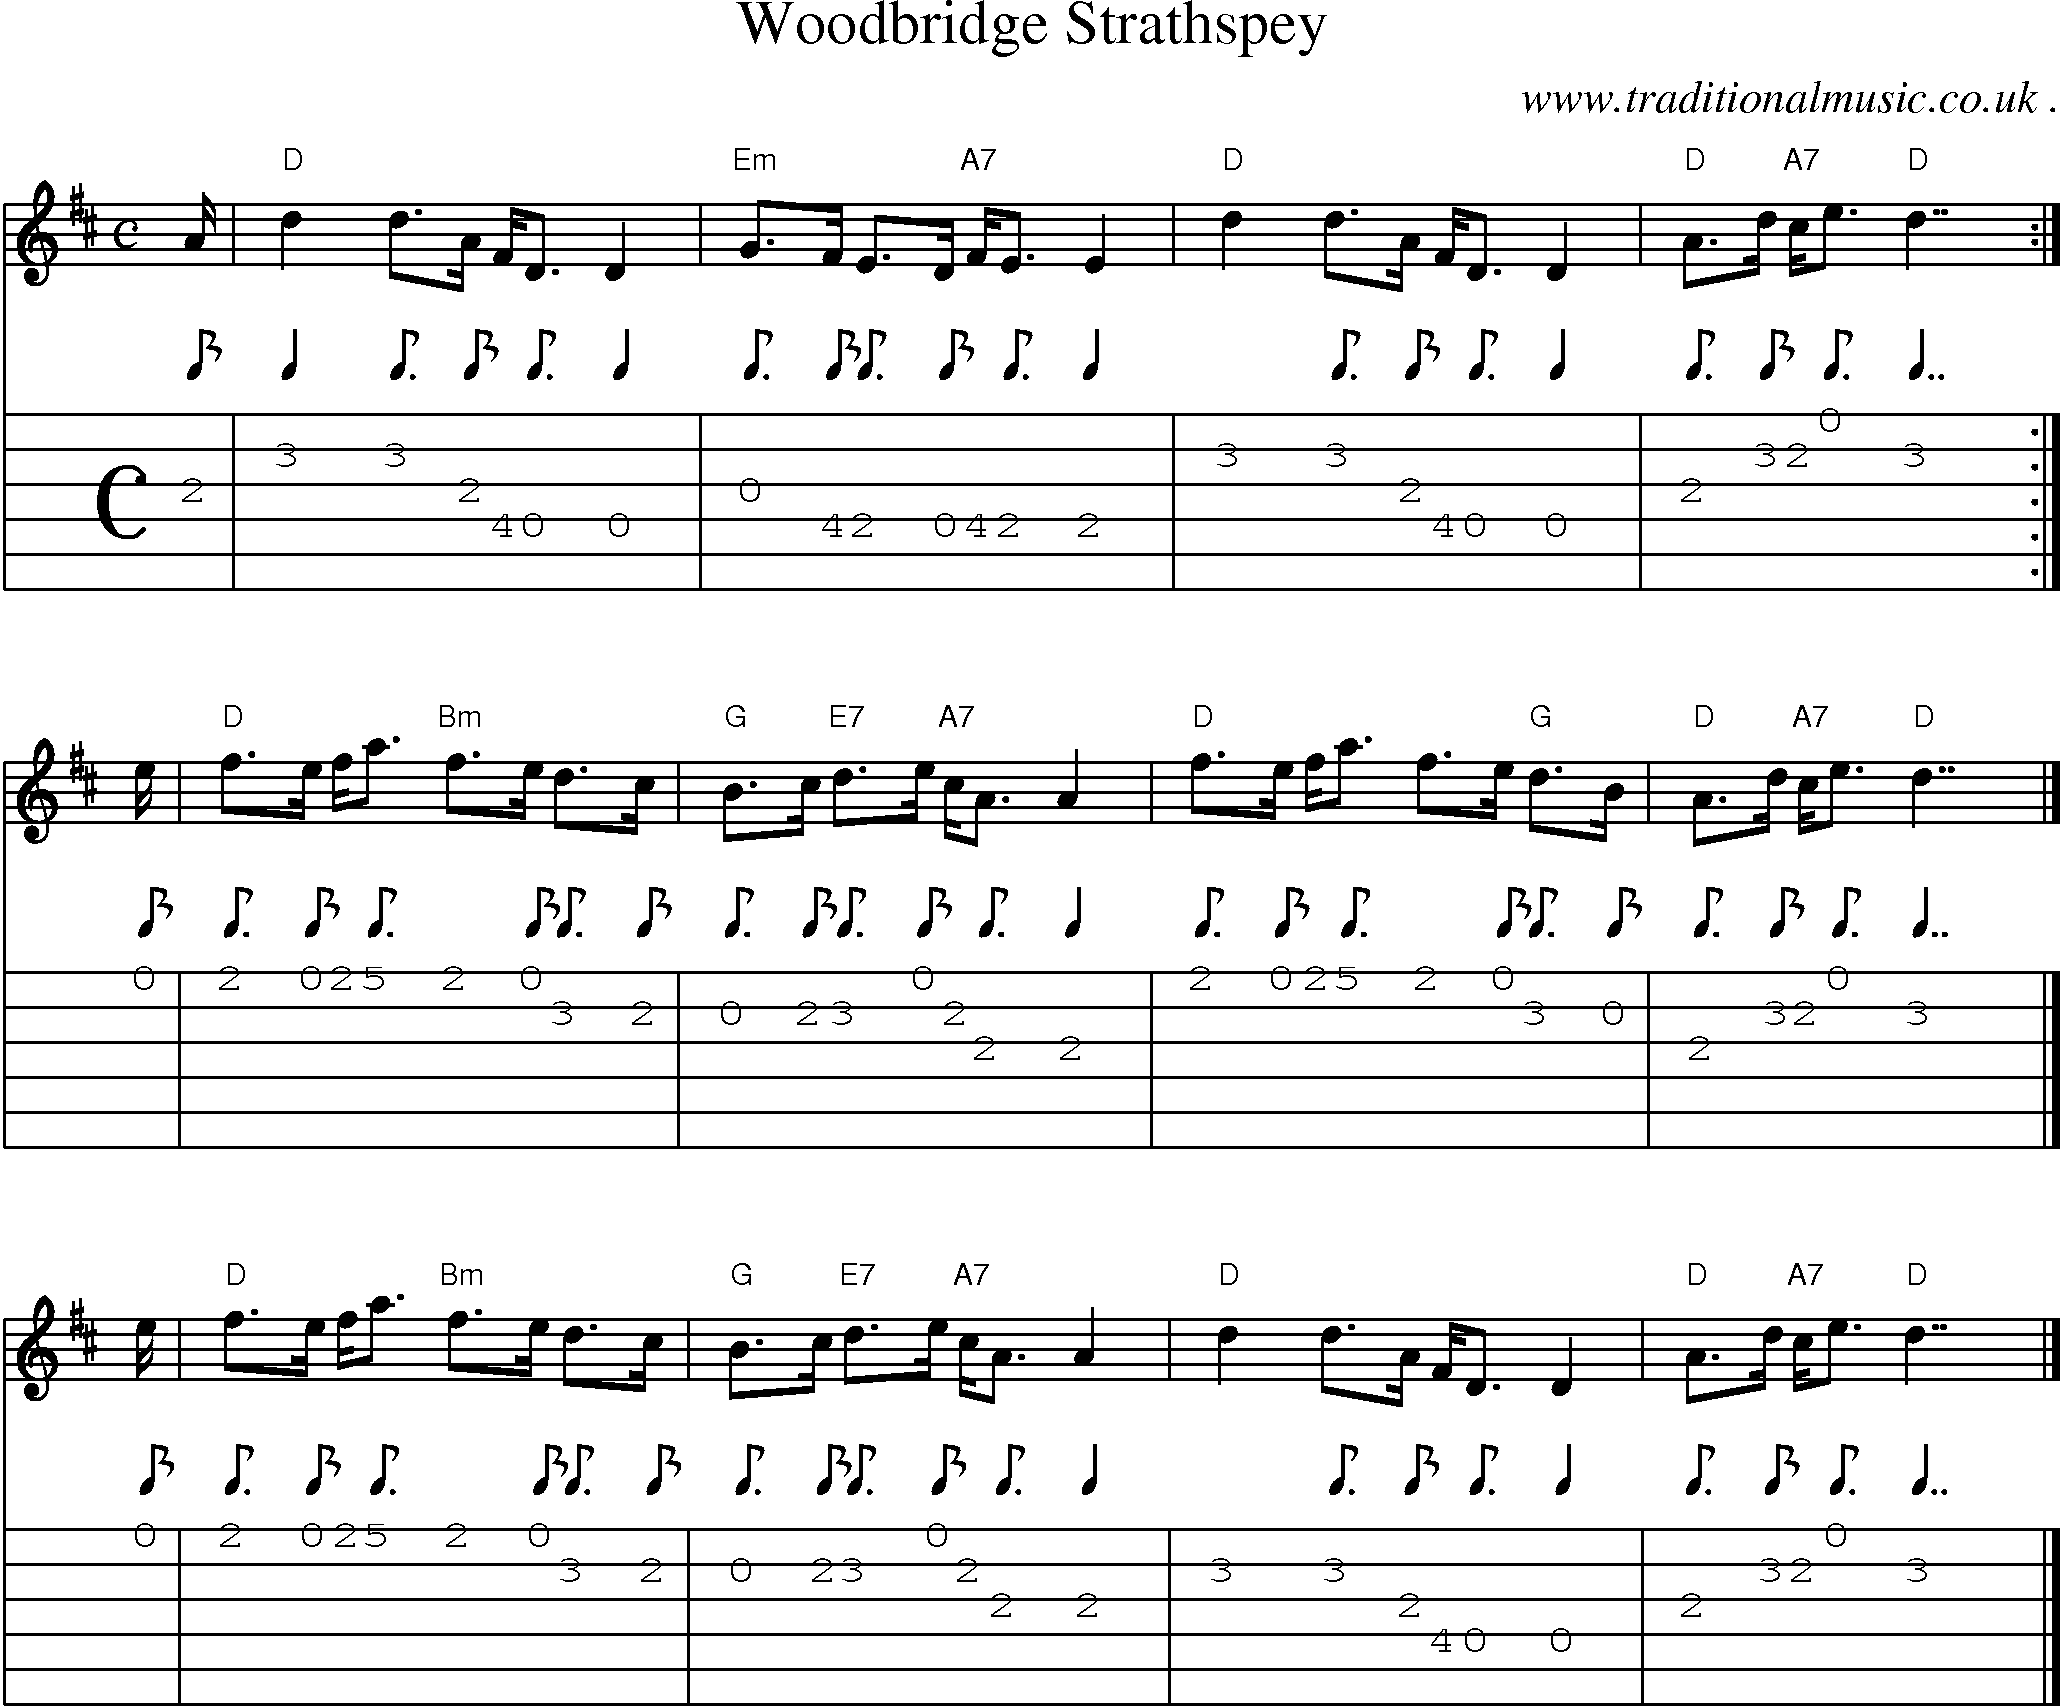 Sheet-music  score, Chords and Guitar Tabs for Woodbridge Strathspey